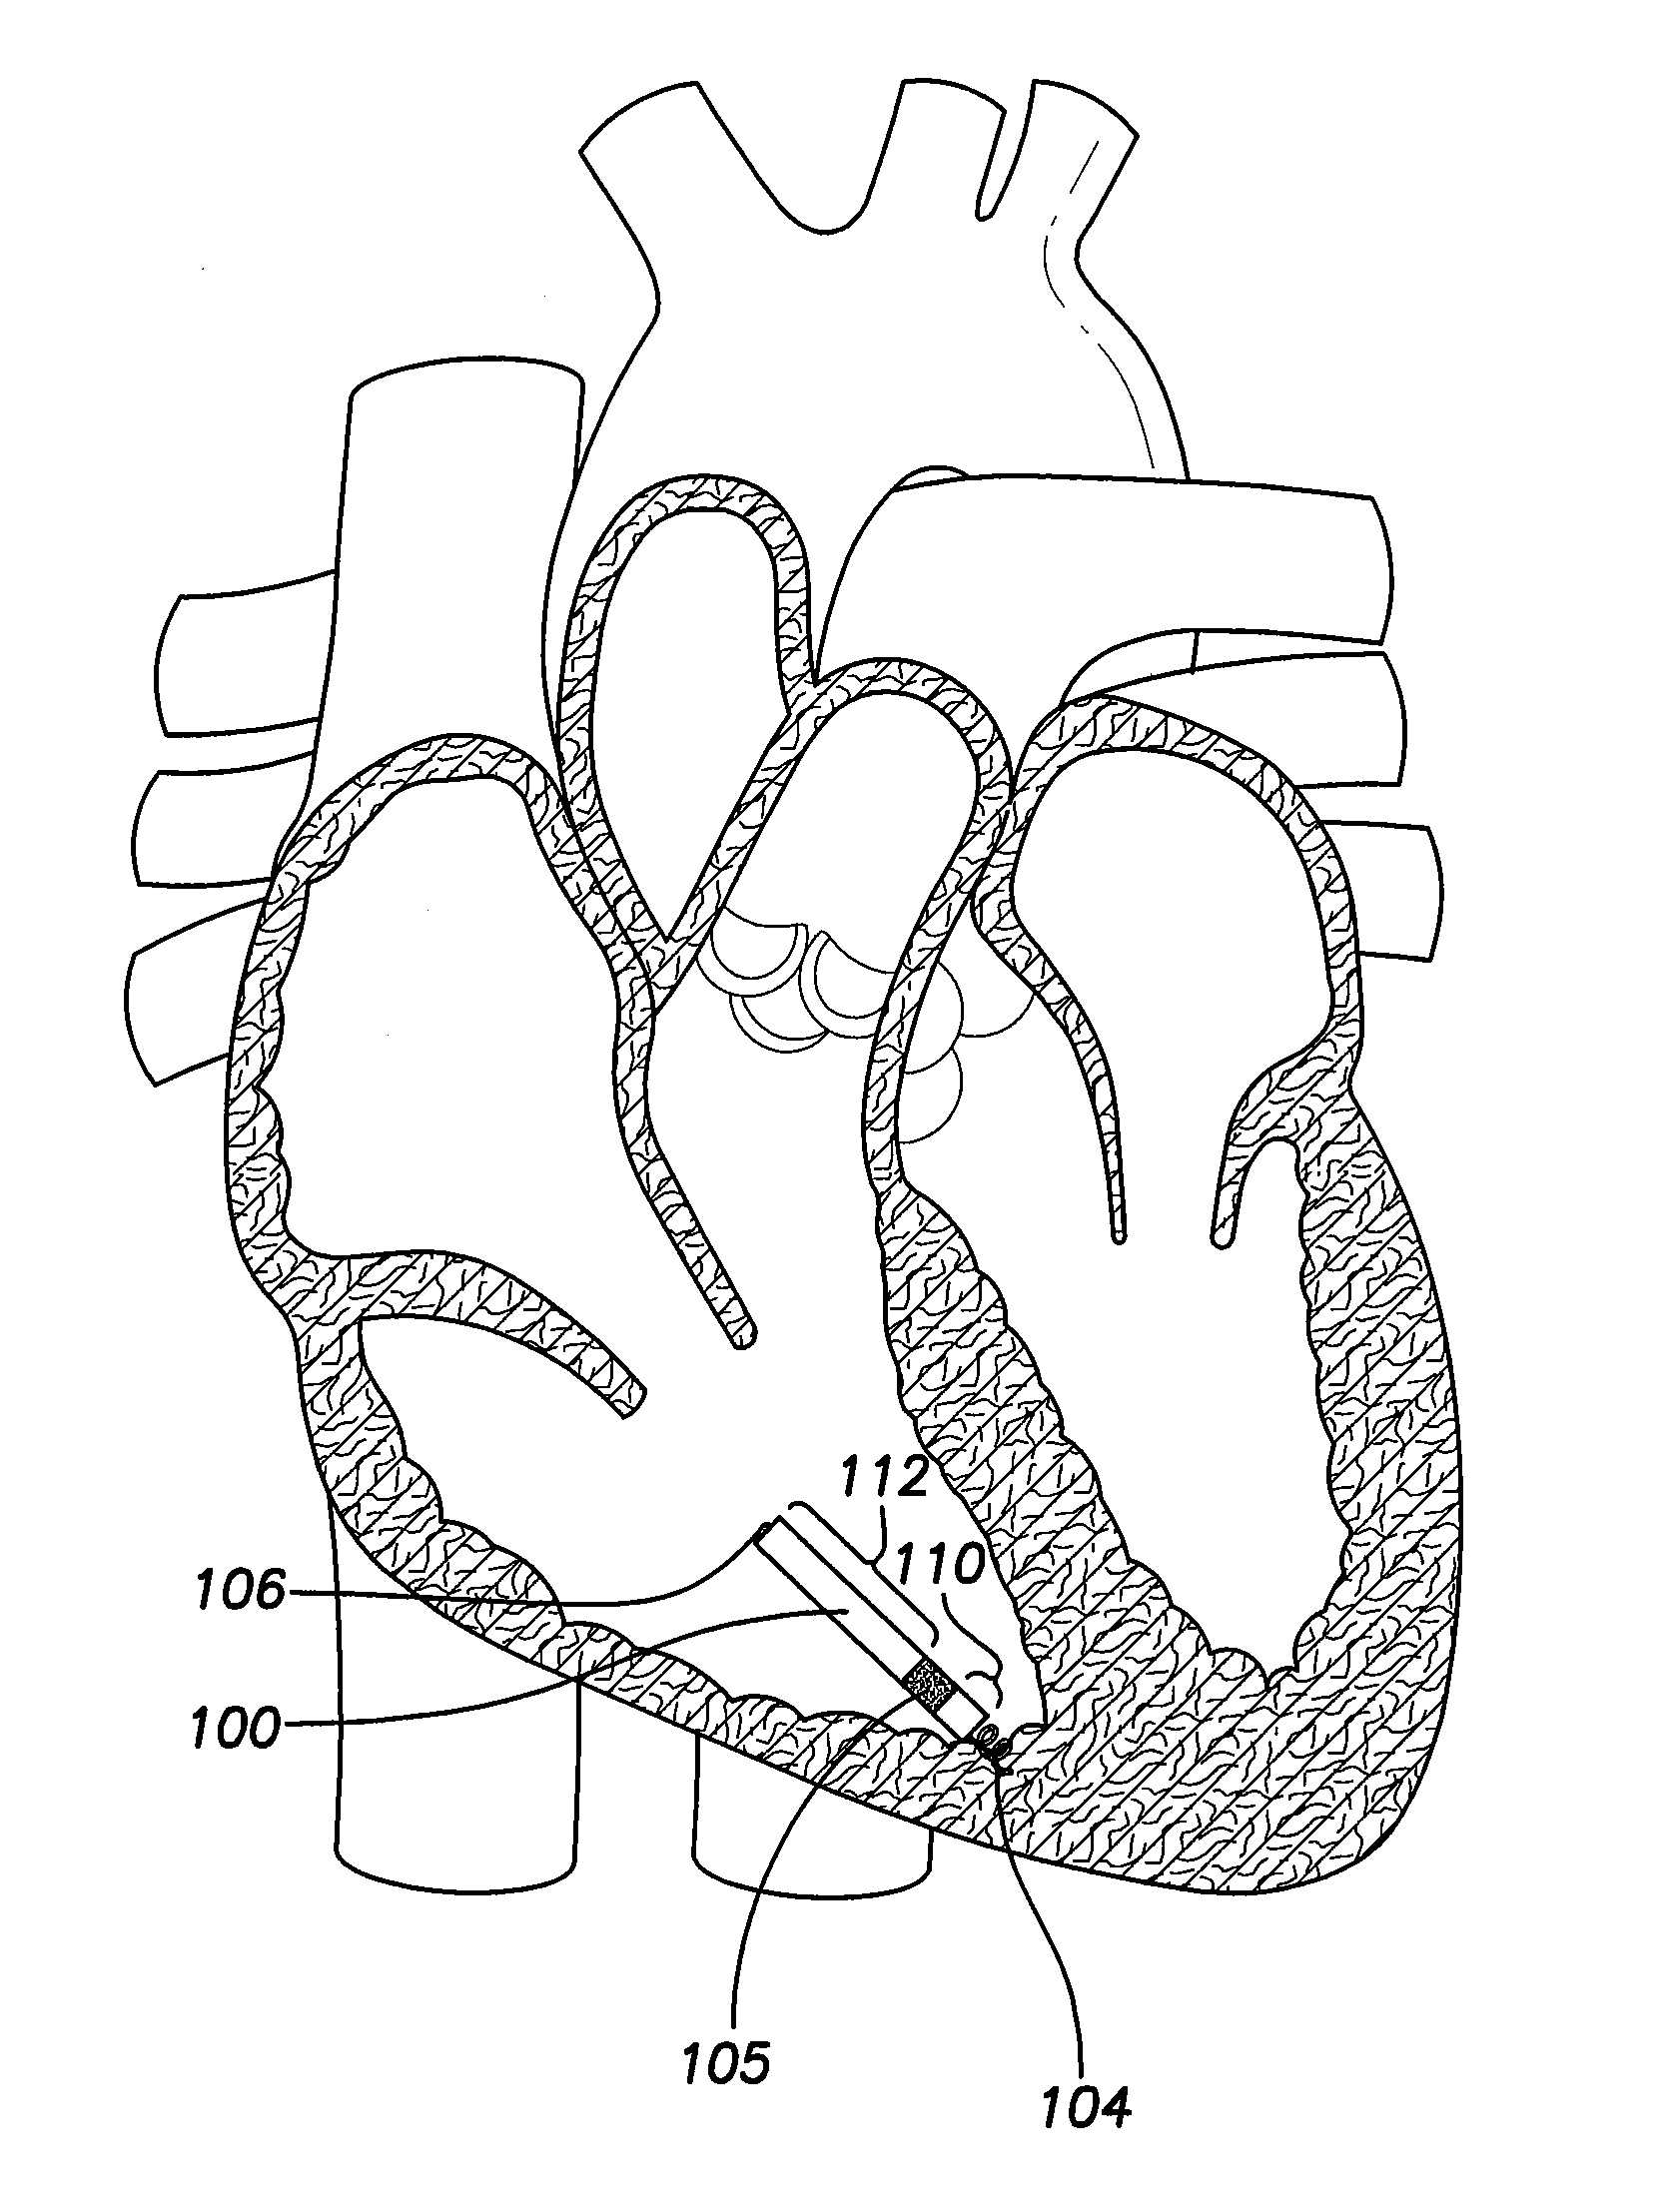 Single chamber leadless intra-cardiac medical device having dual chamber sensing with signal discrimination